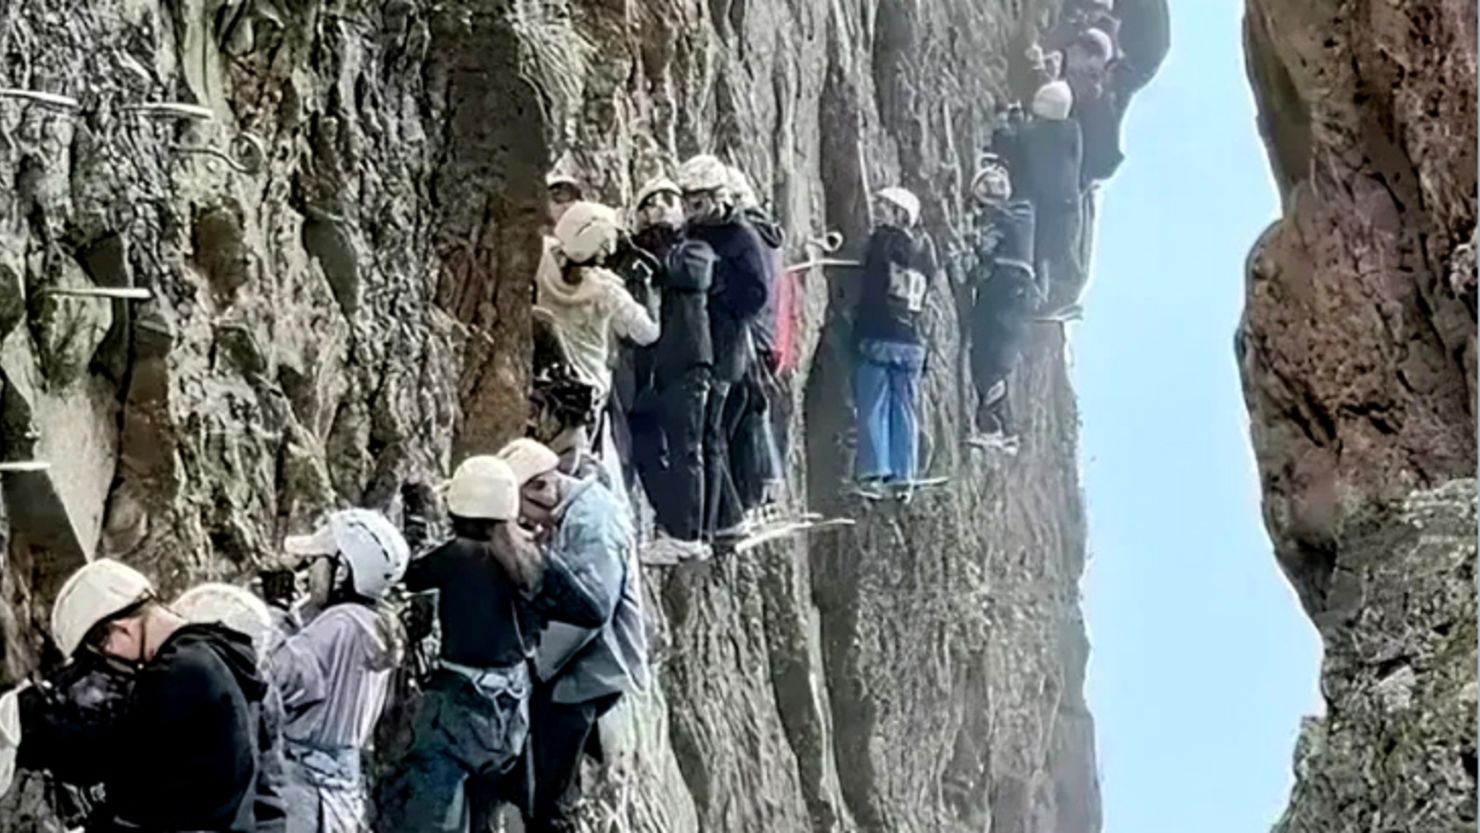 This screengrab shows tourists trapped on a rock climbing trail in eastern China during the Labor Holiday long weekend.